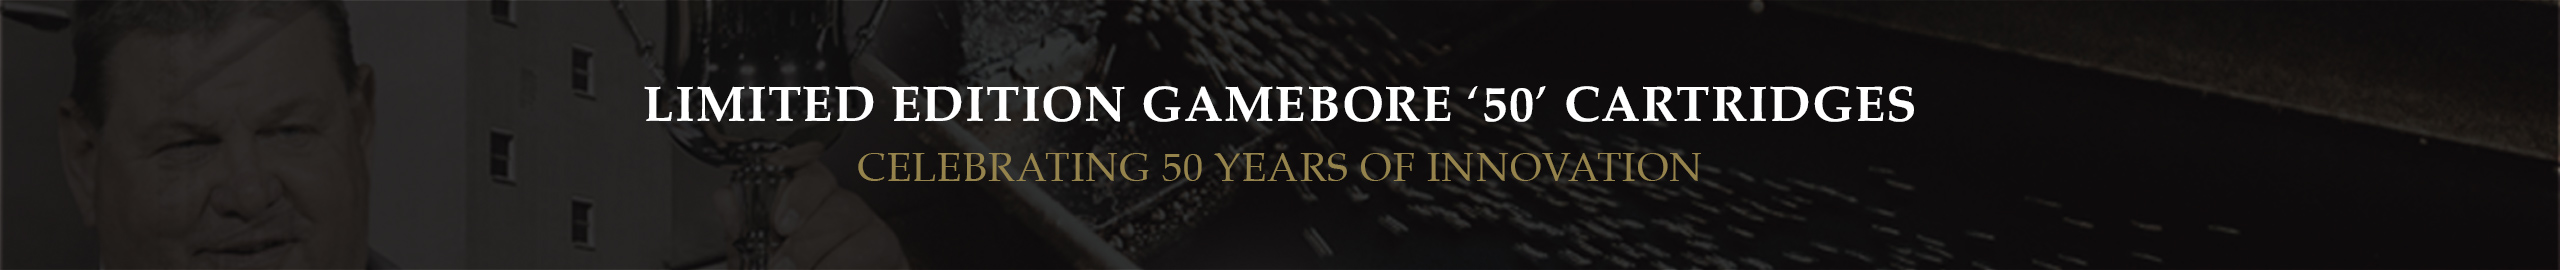 Gamebore 50 Limited Edition